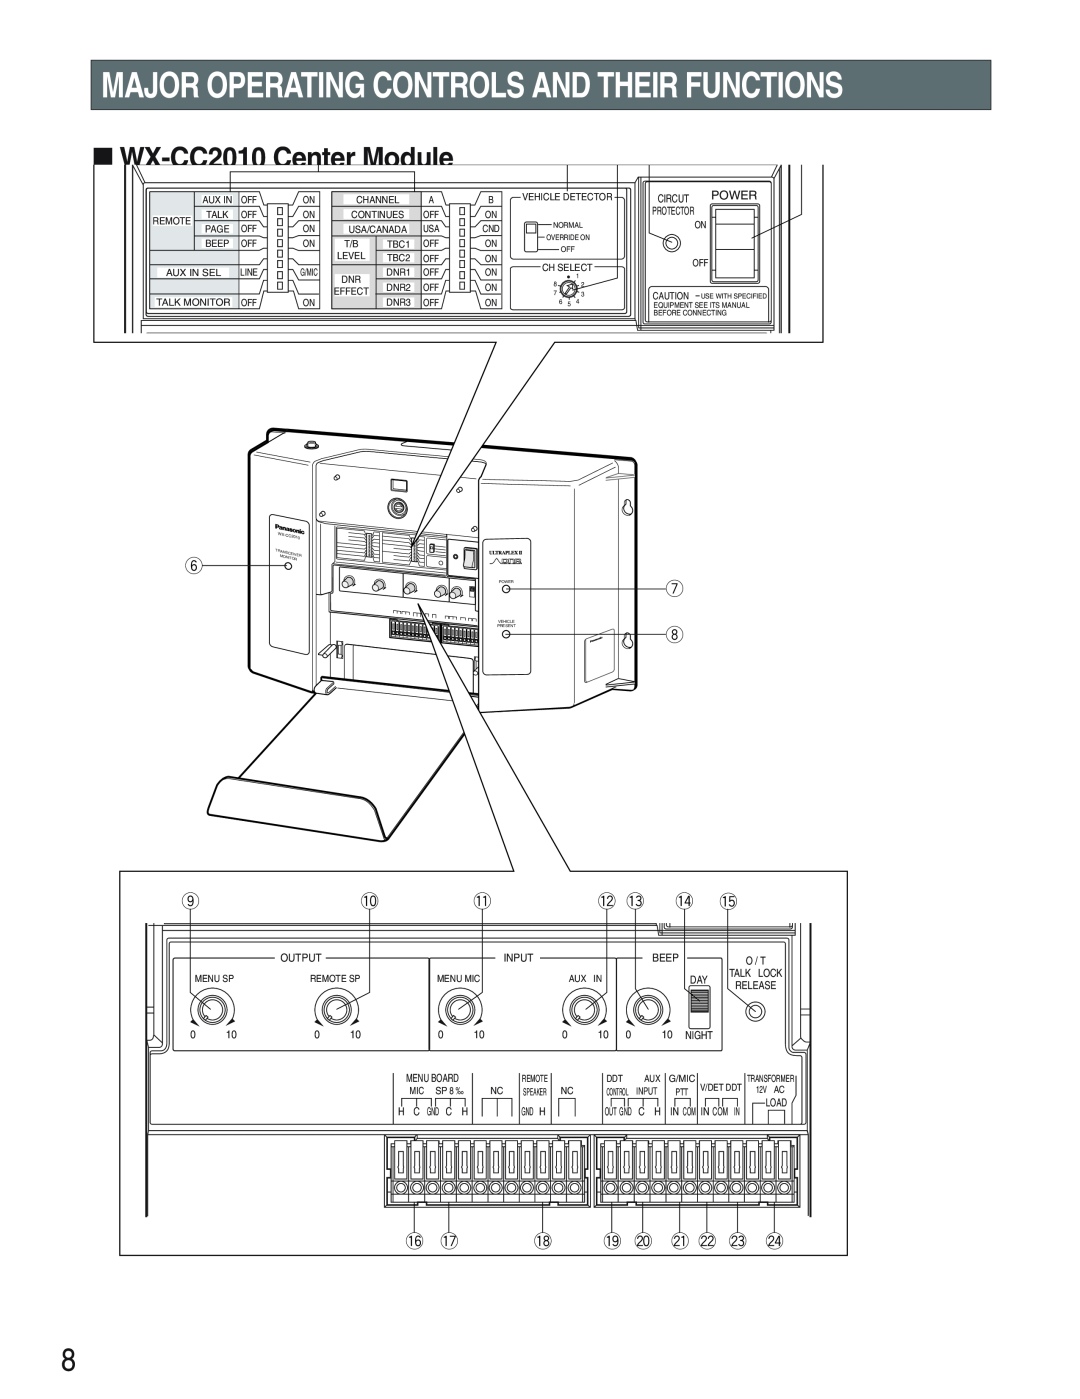 Panasonic WX-CC2010Center Module, 2!3 !4 !5, 6 !7, 9 @0 @1@2 @3 @4, Major Operating Controls And Their Functions, Power 